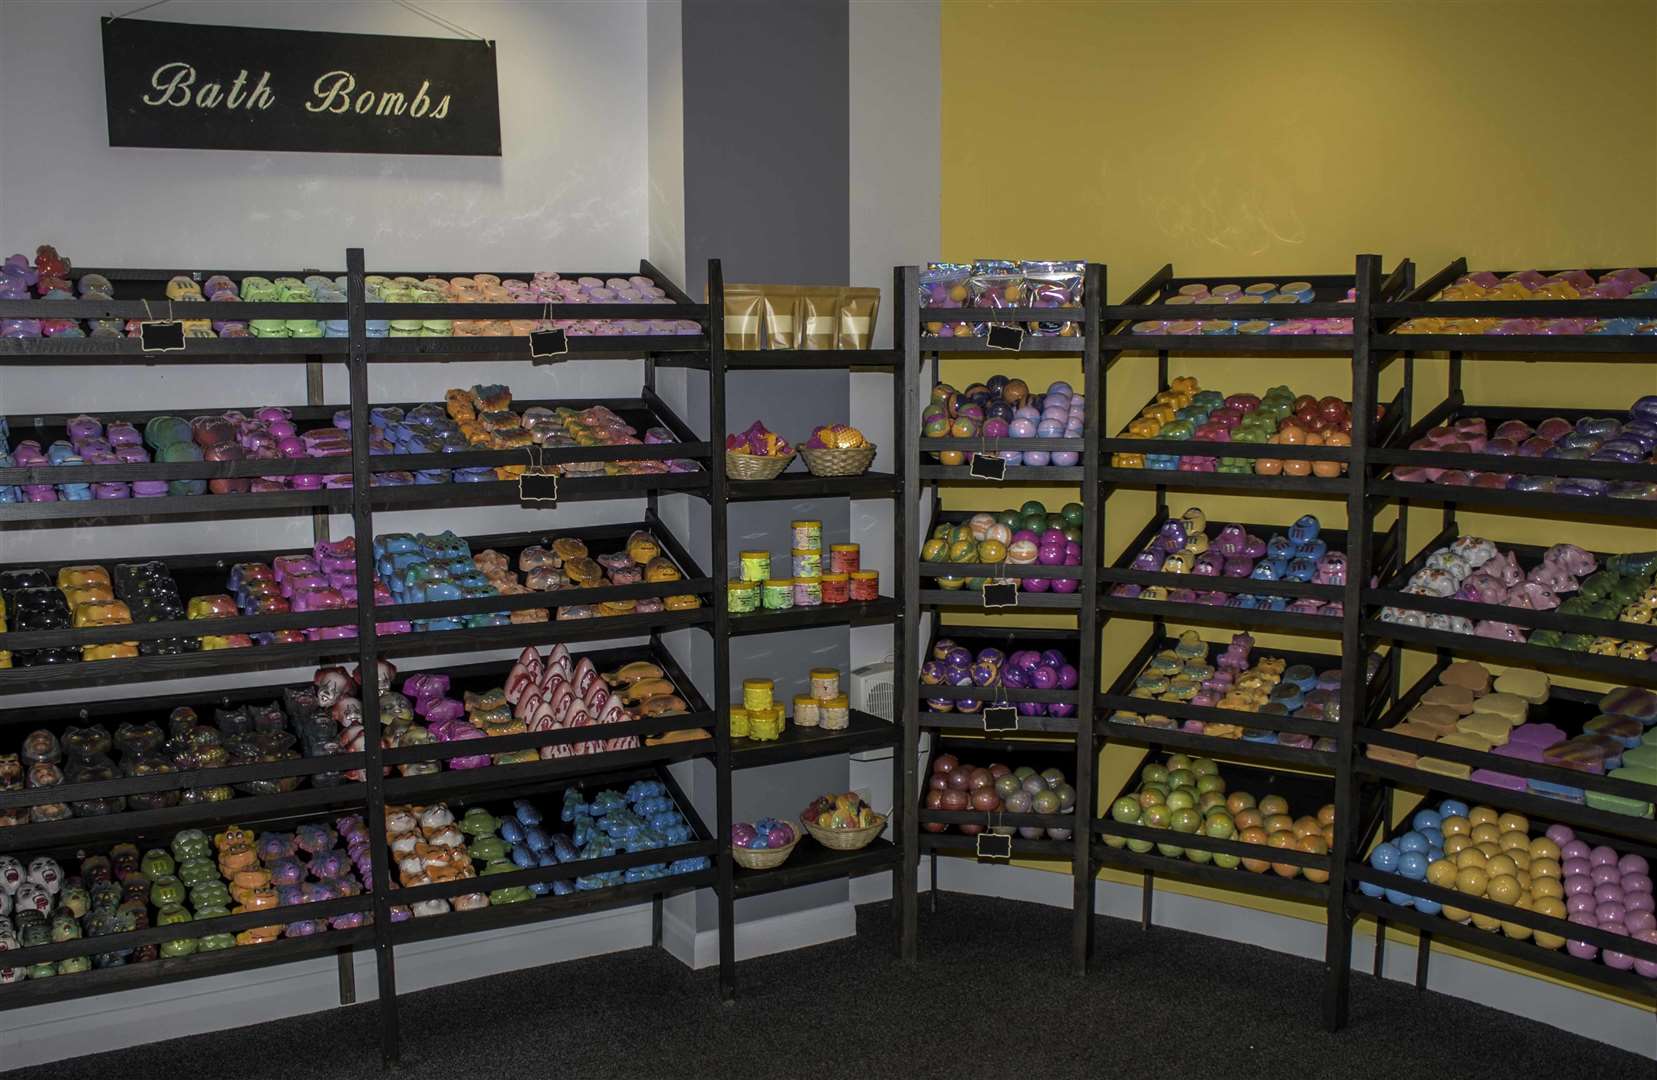 Bath bombs are joined by creams, scrubs, melts and candles on the shelves at Bath Bomb Boom